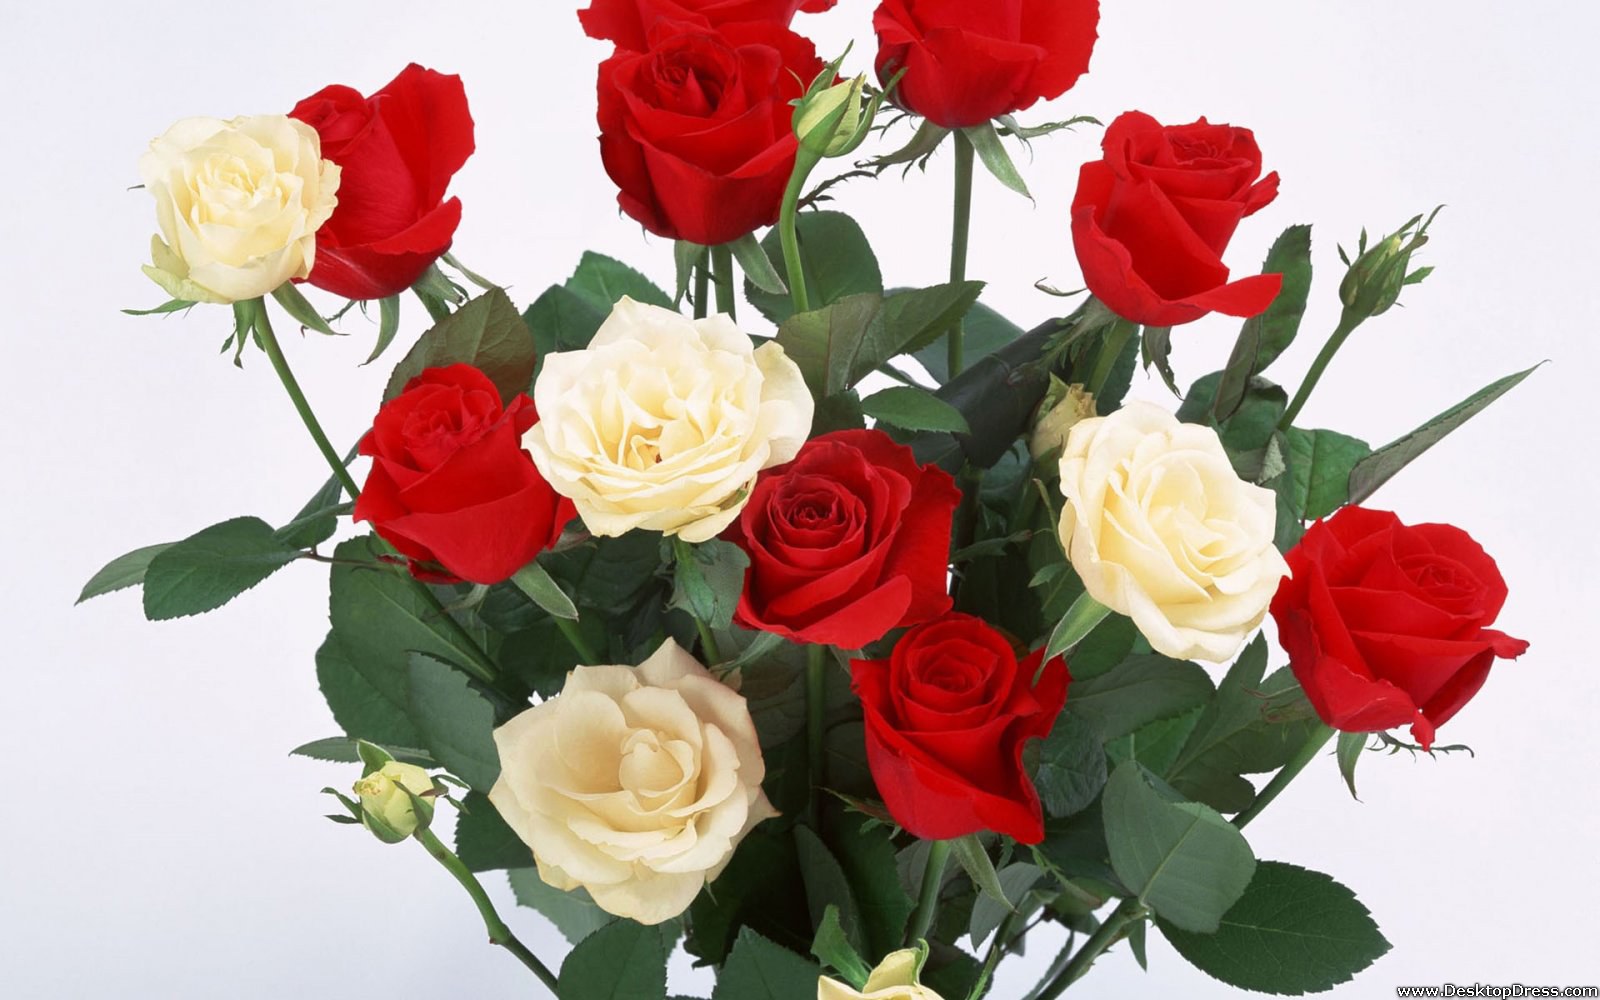 Red And White Roses - Rose - 1600x1000 Wallpaper 